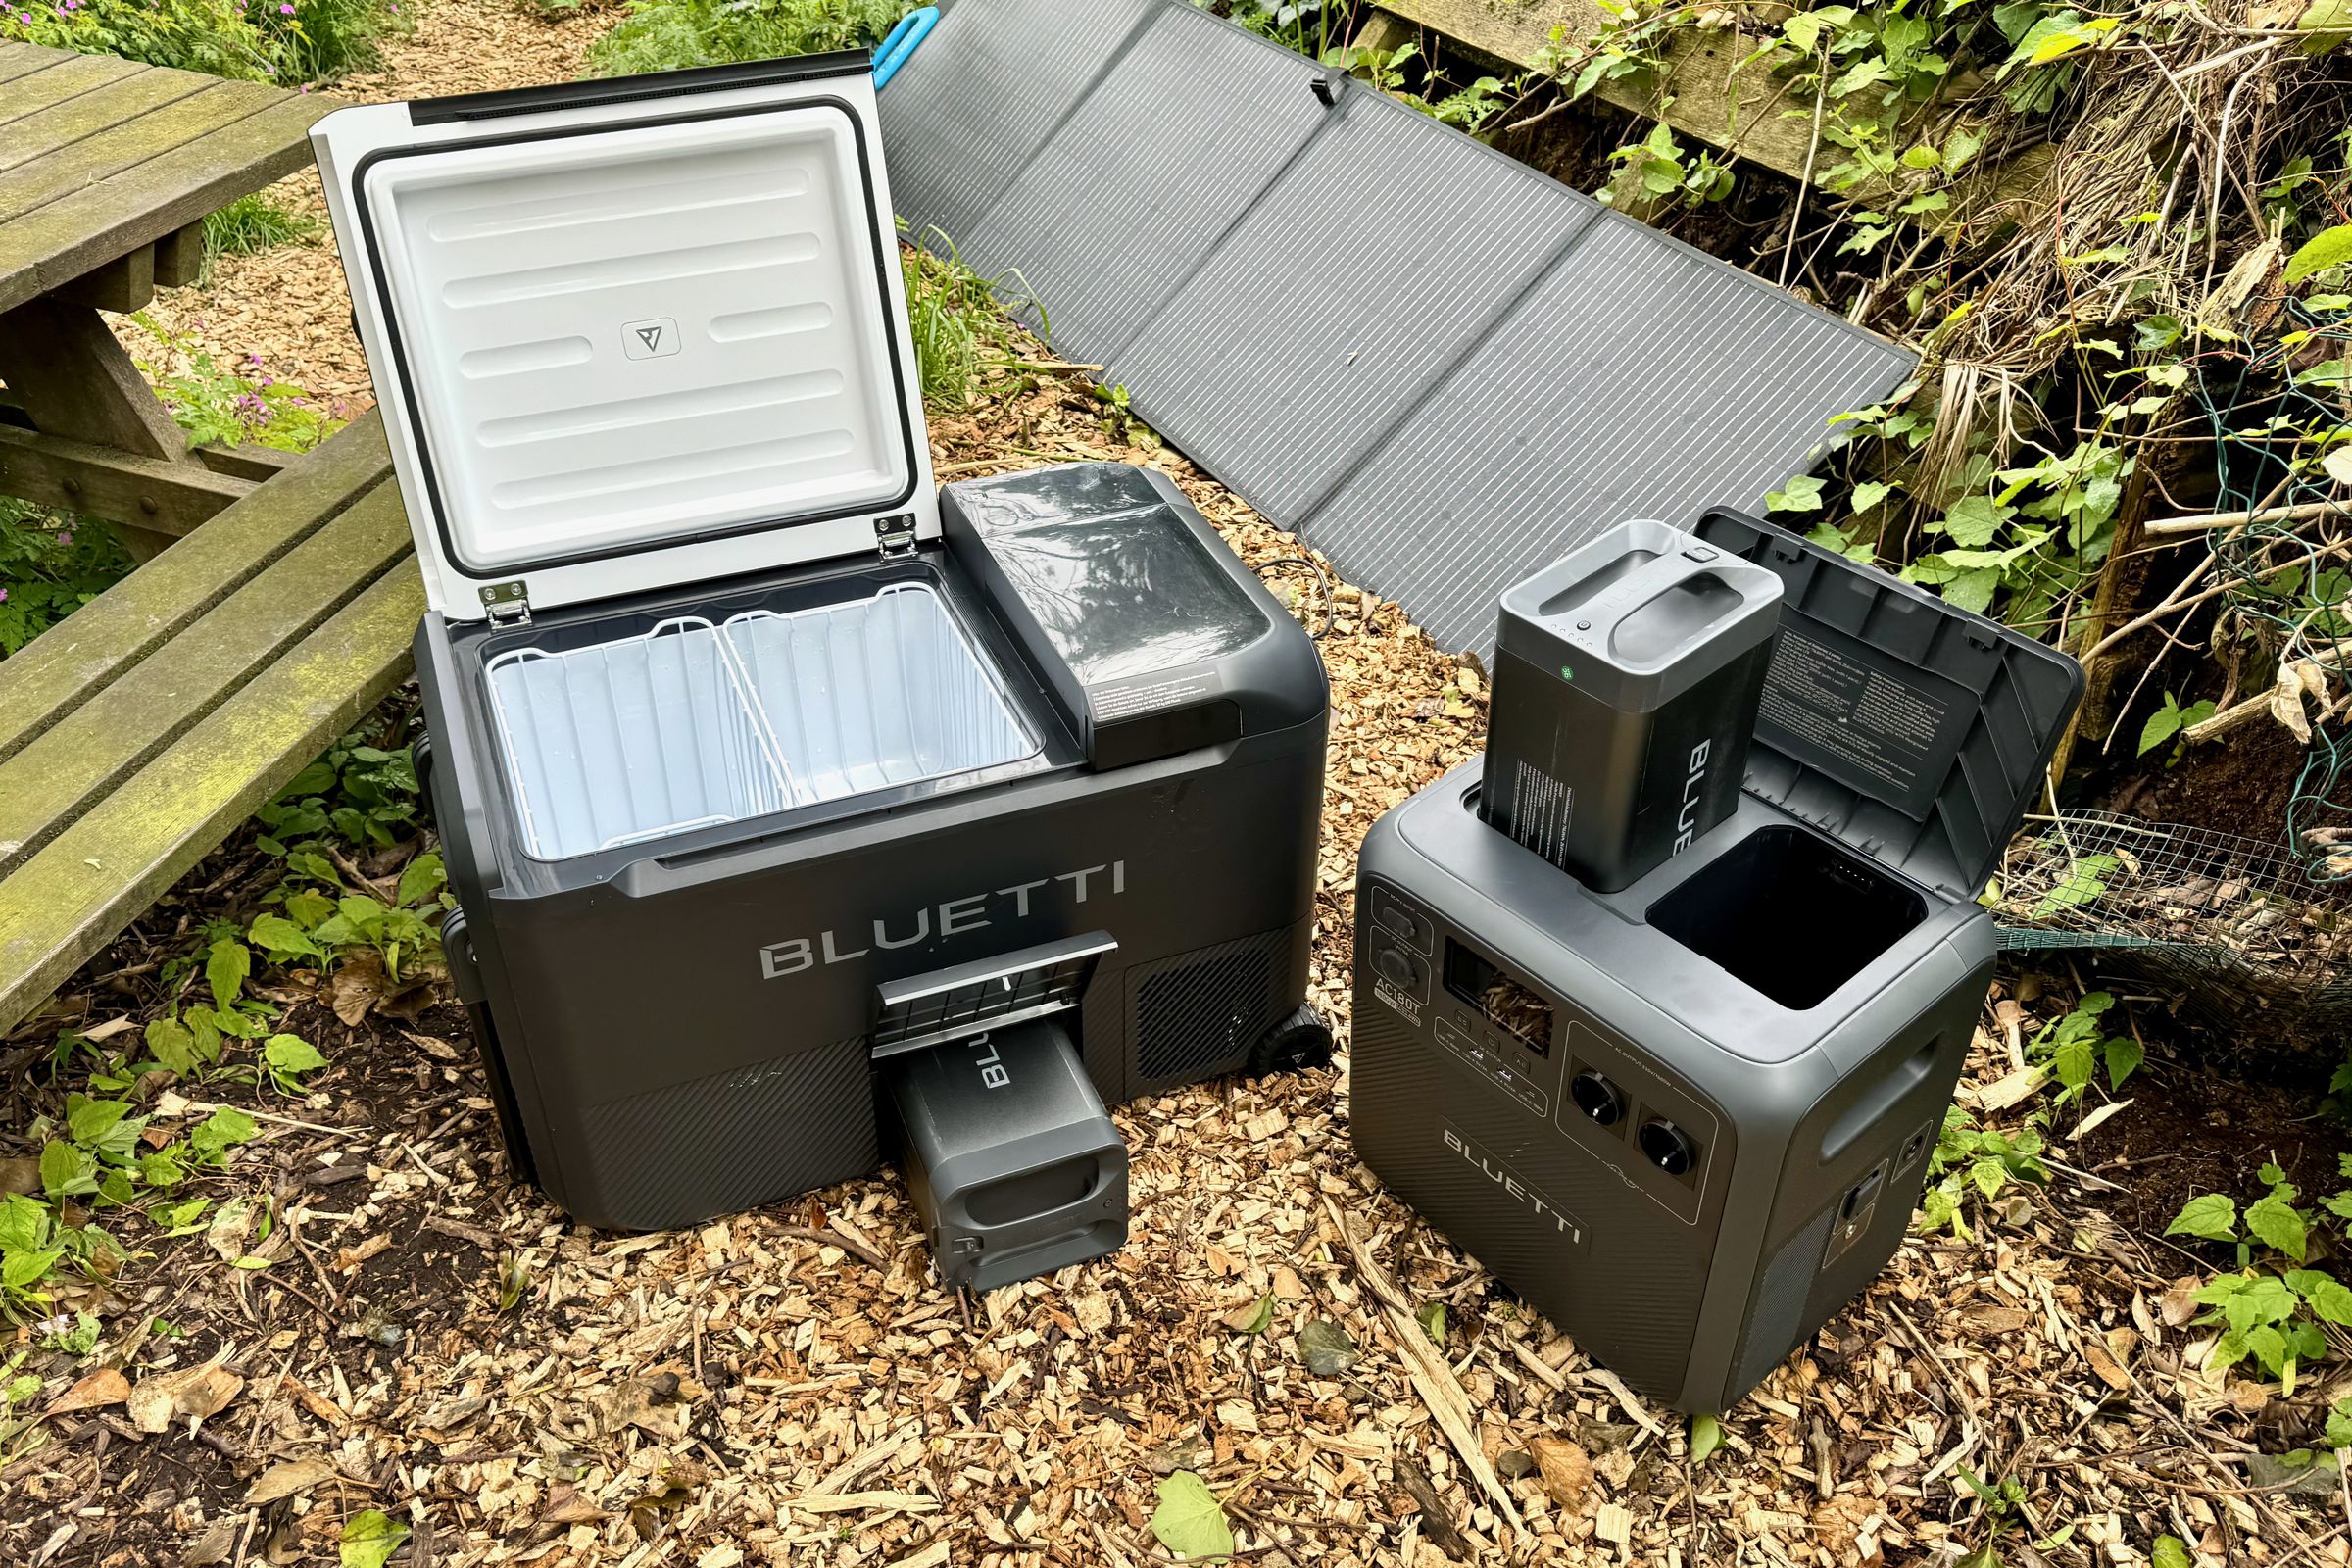 The Bluetti MultiCooler and AC180T solar generator sitting in a park next to a picnic table with a solar panel in the background.